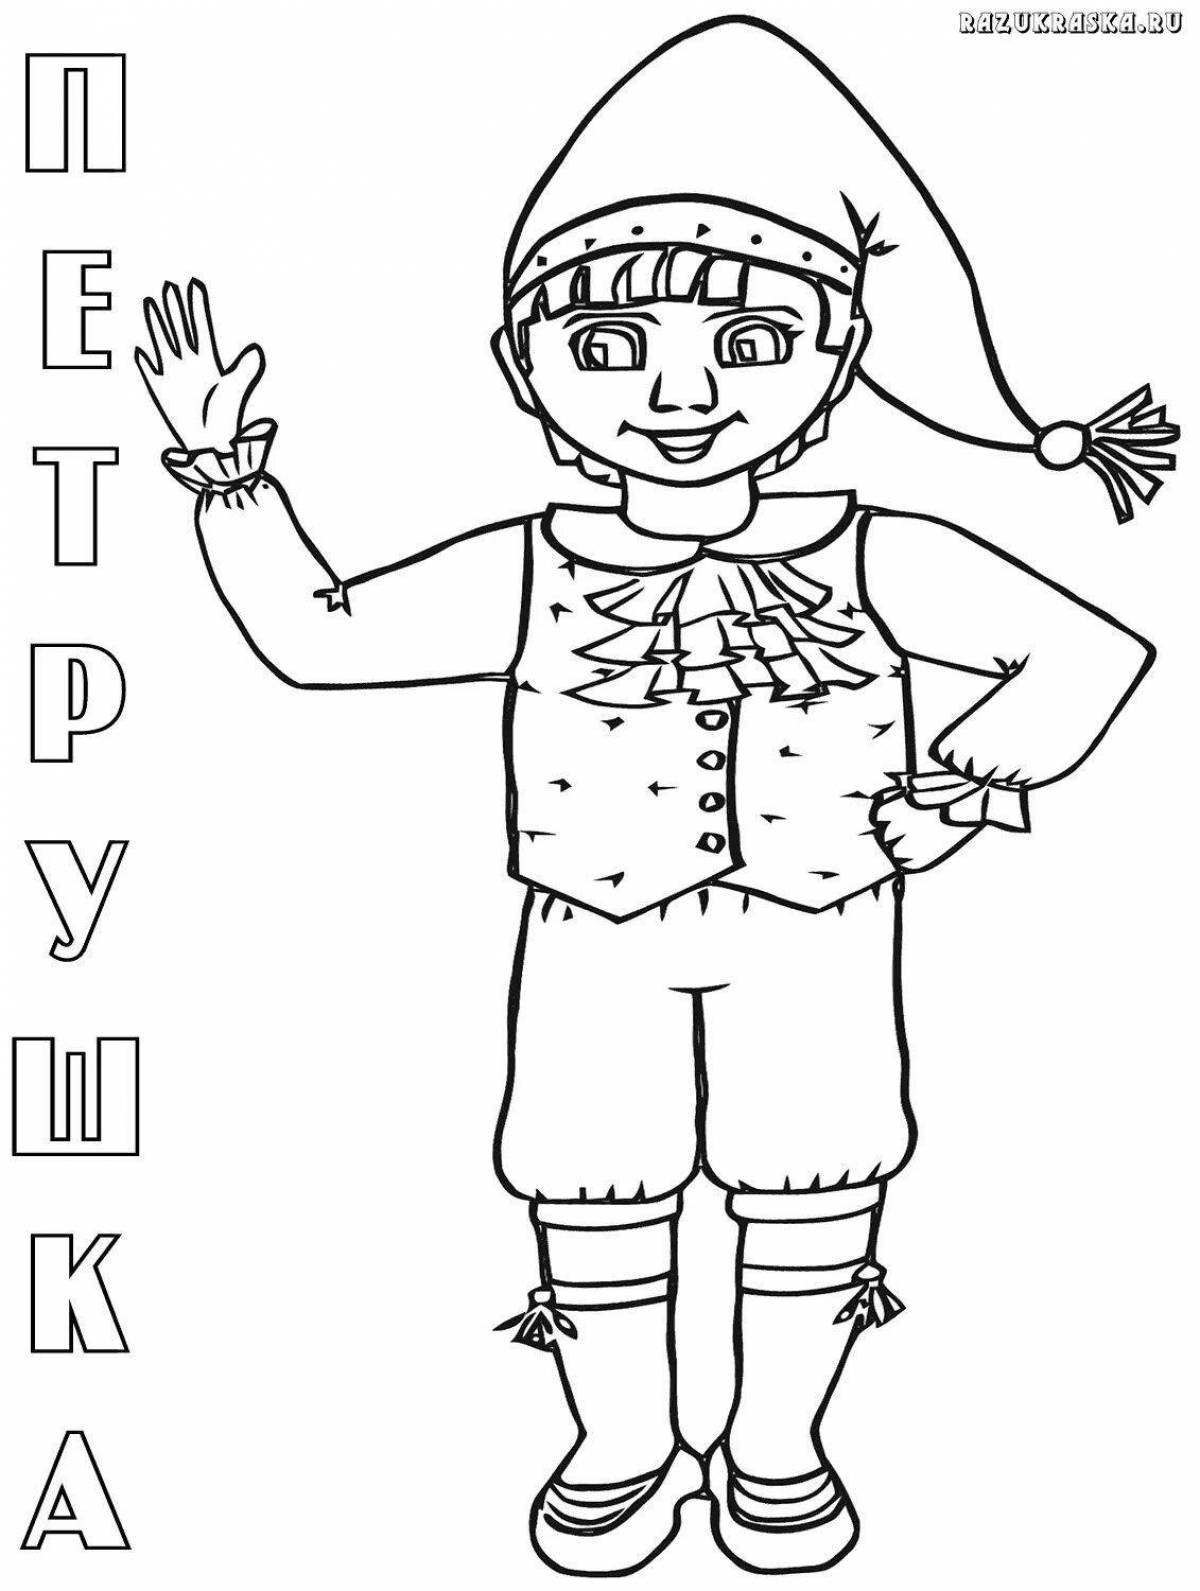 Parsley character coloring page